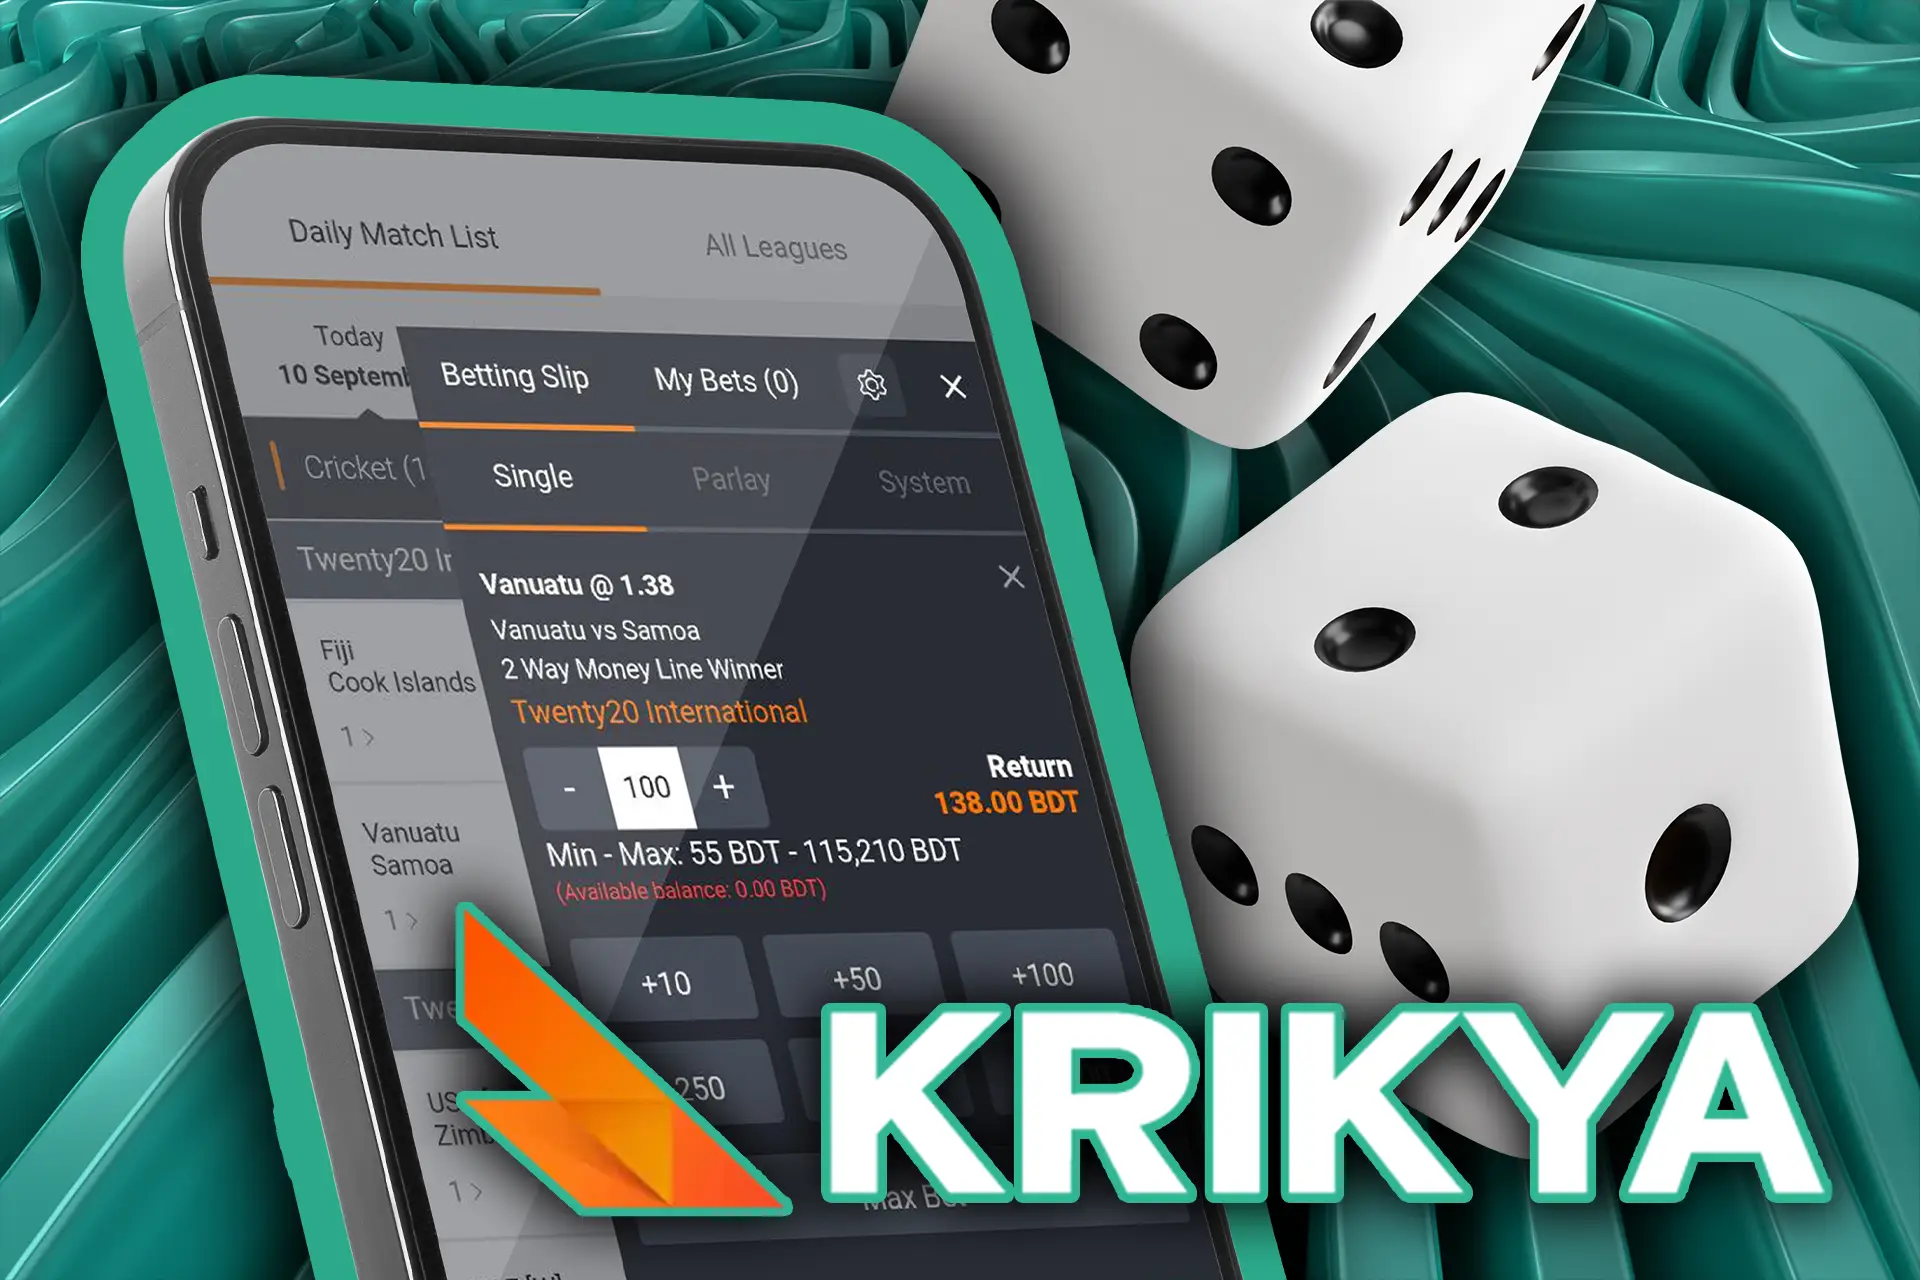 You can place single and express bets on the matchs in the Krikya app.